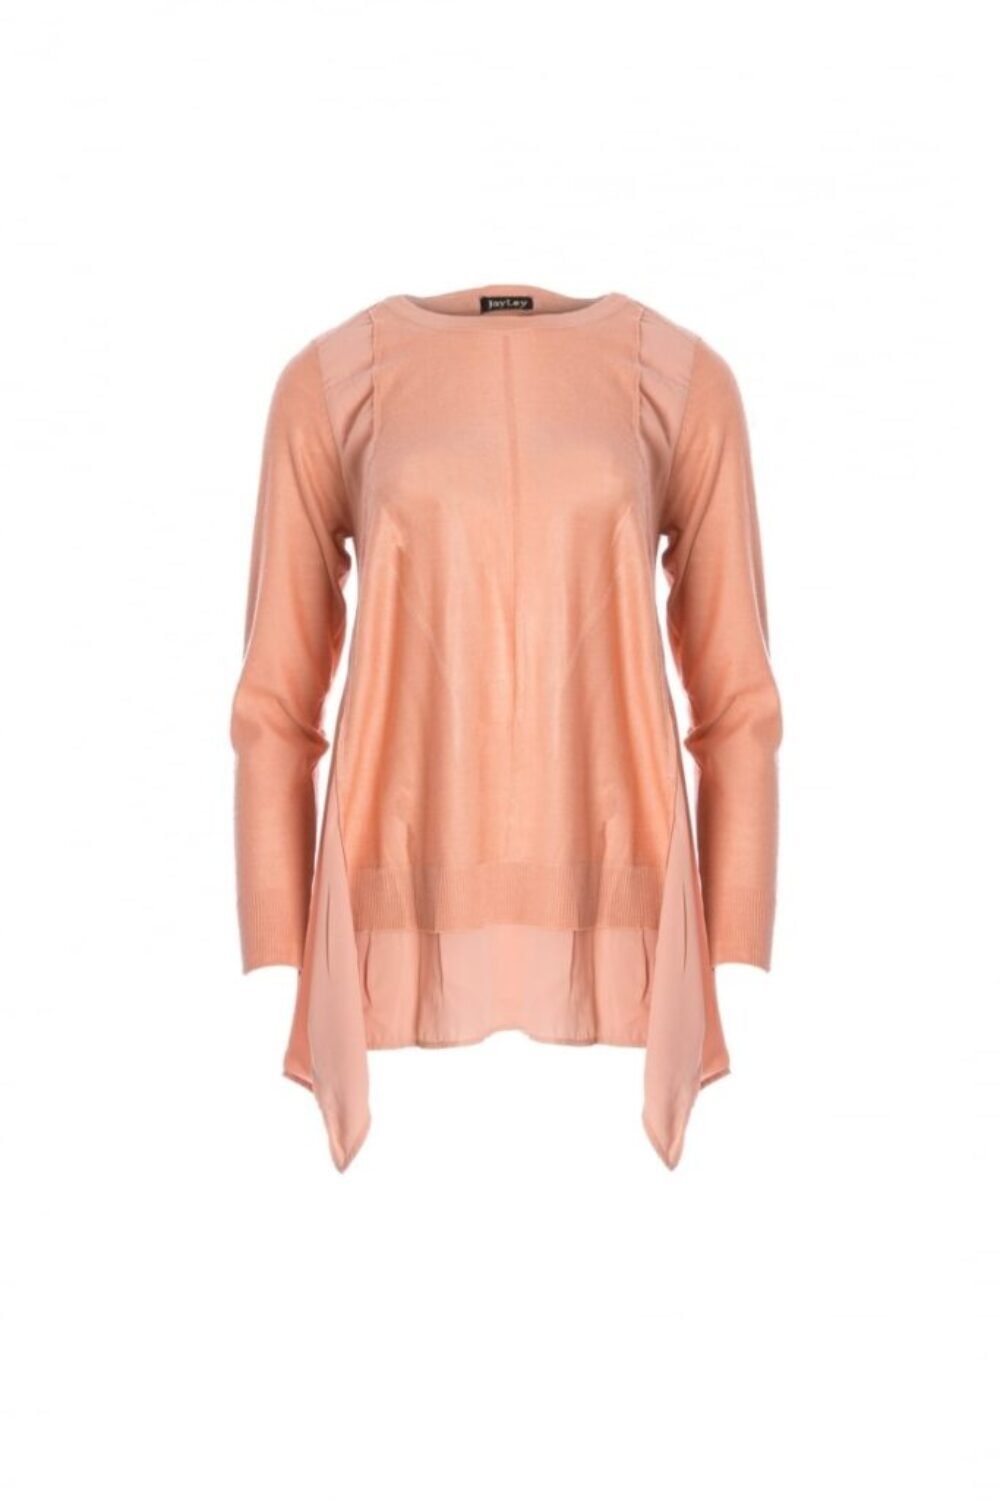 Shop Lux Multi Knitted Clothing and women's luxury and designer clothes at www.lux-apparel.co.uk